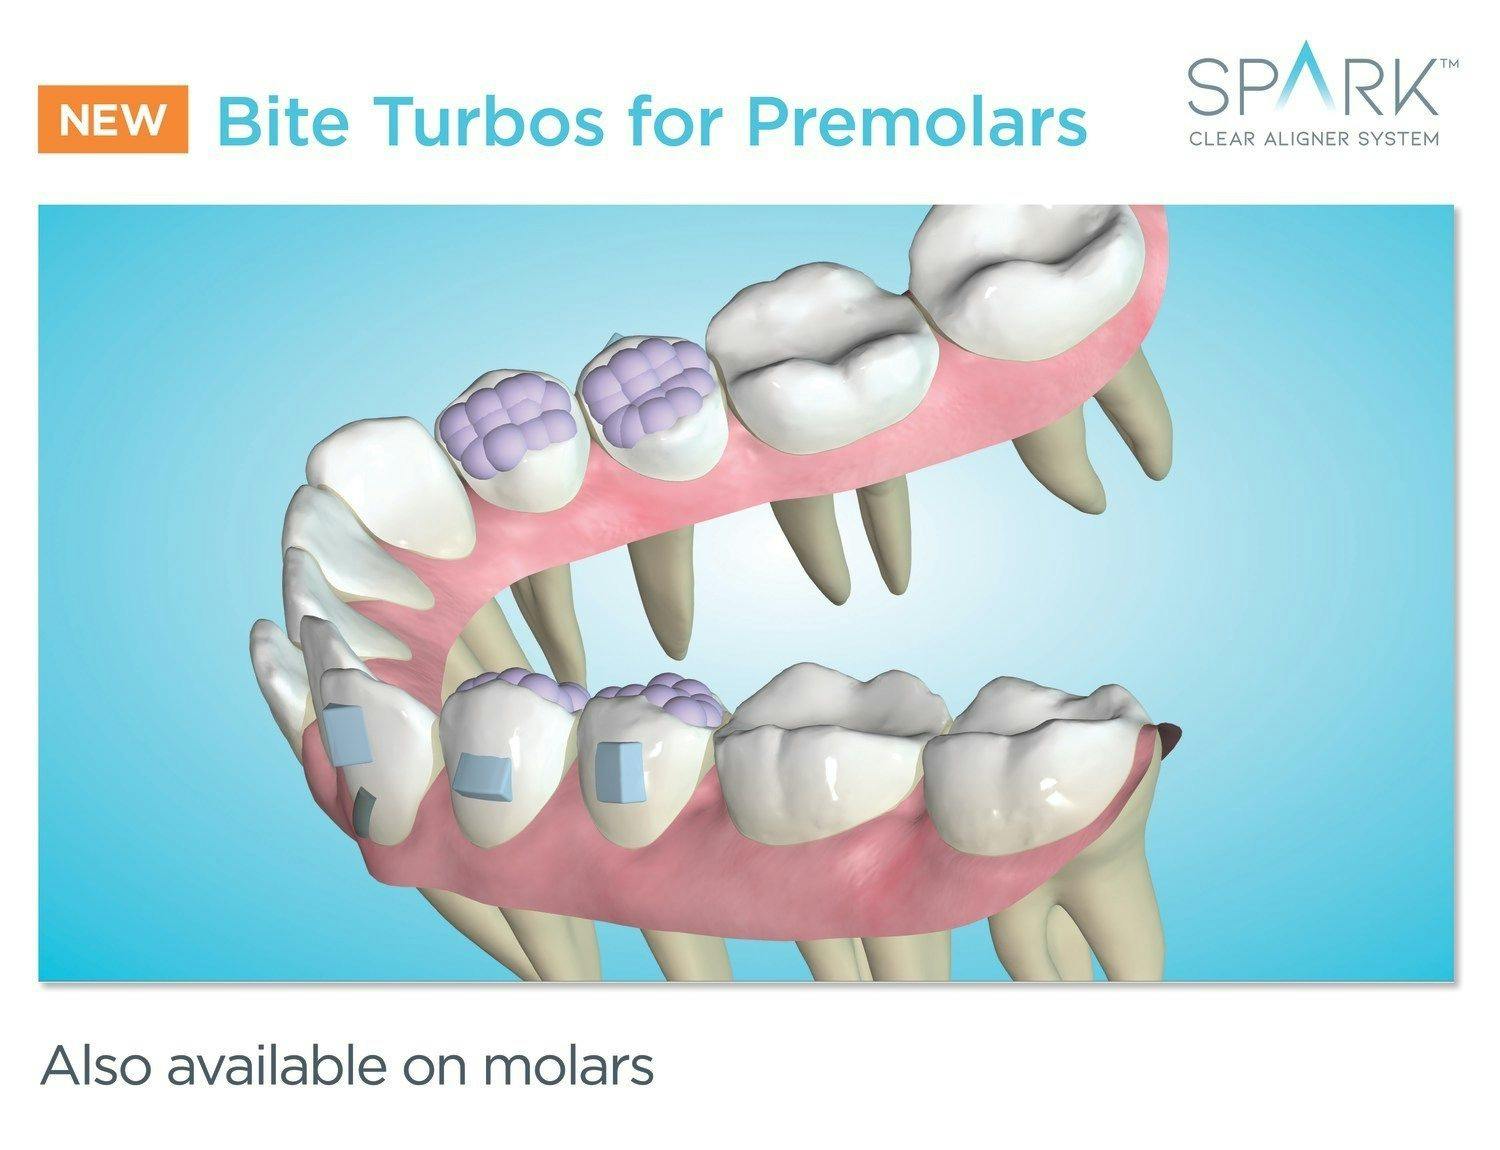 Spark Aligners Announce New Release 12